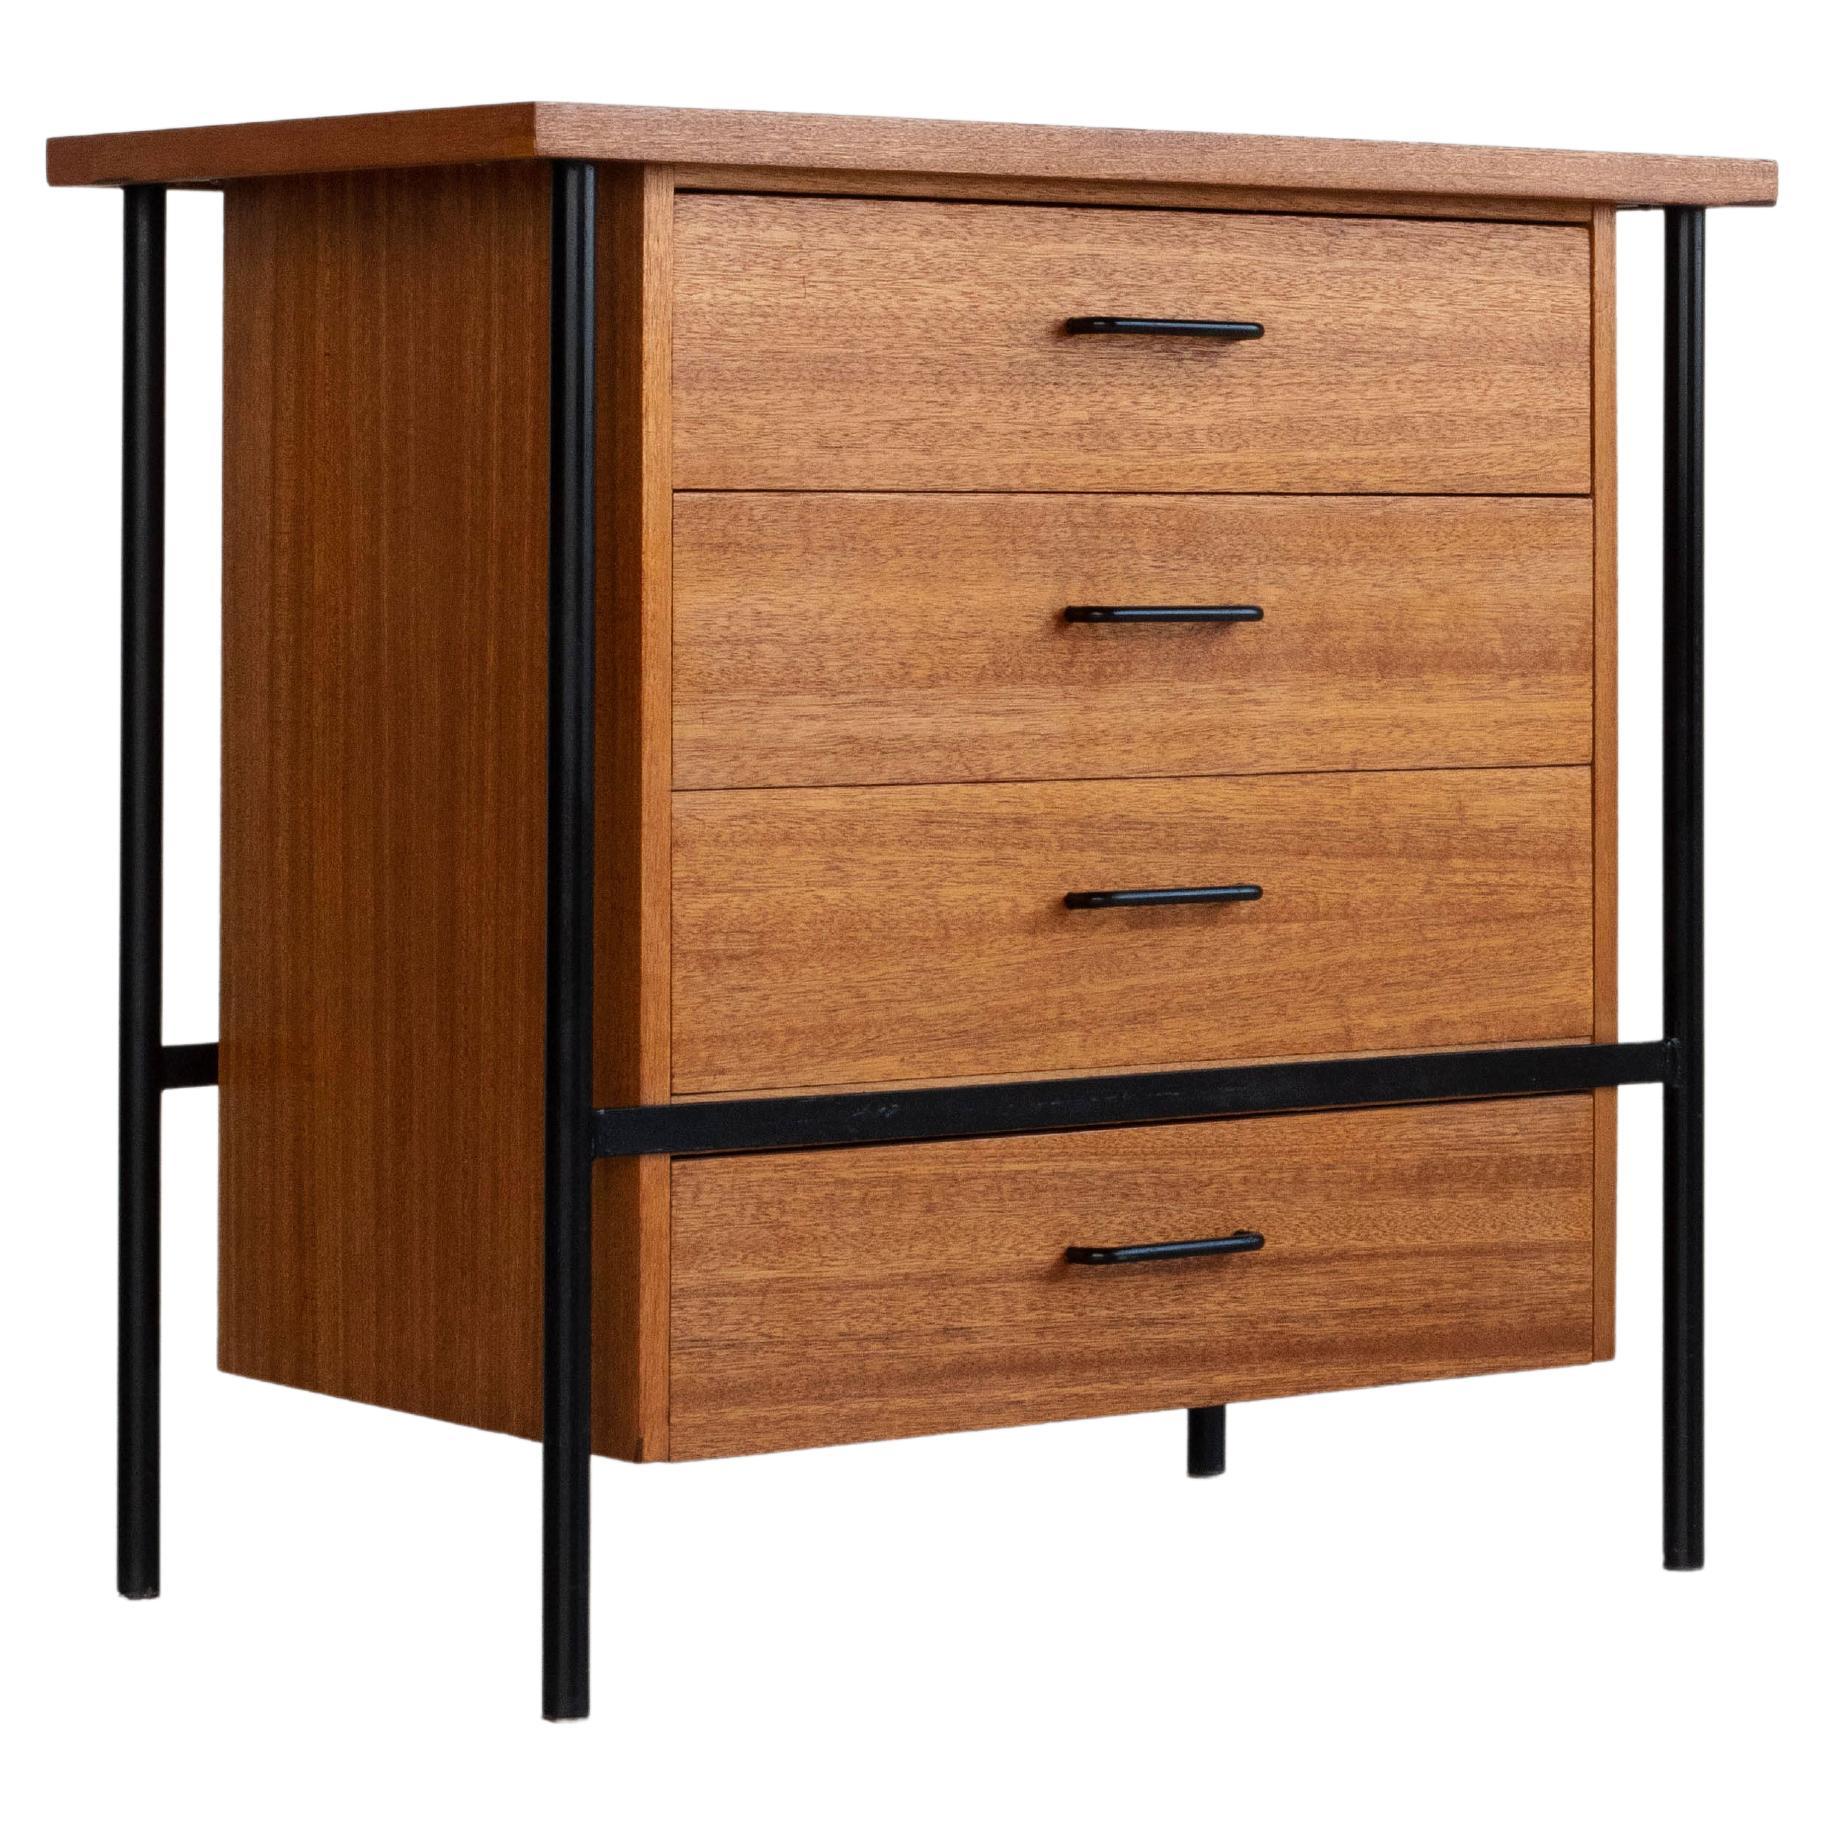 Donald Knorr Mahogany and Steel Dresser for Vista of California, 1950s For Sale